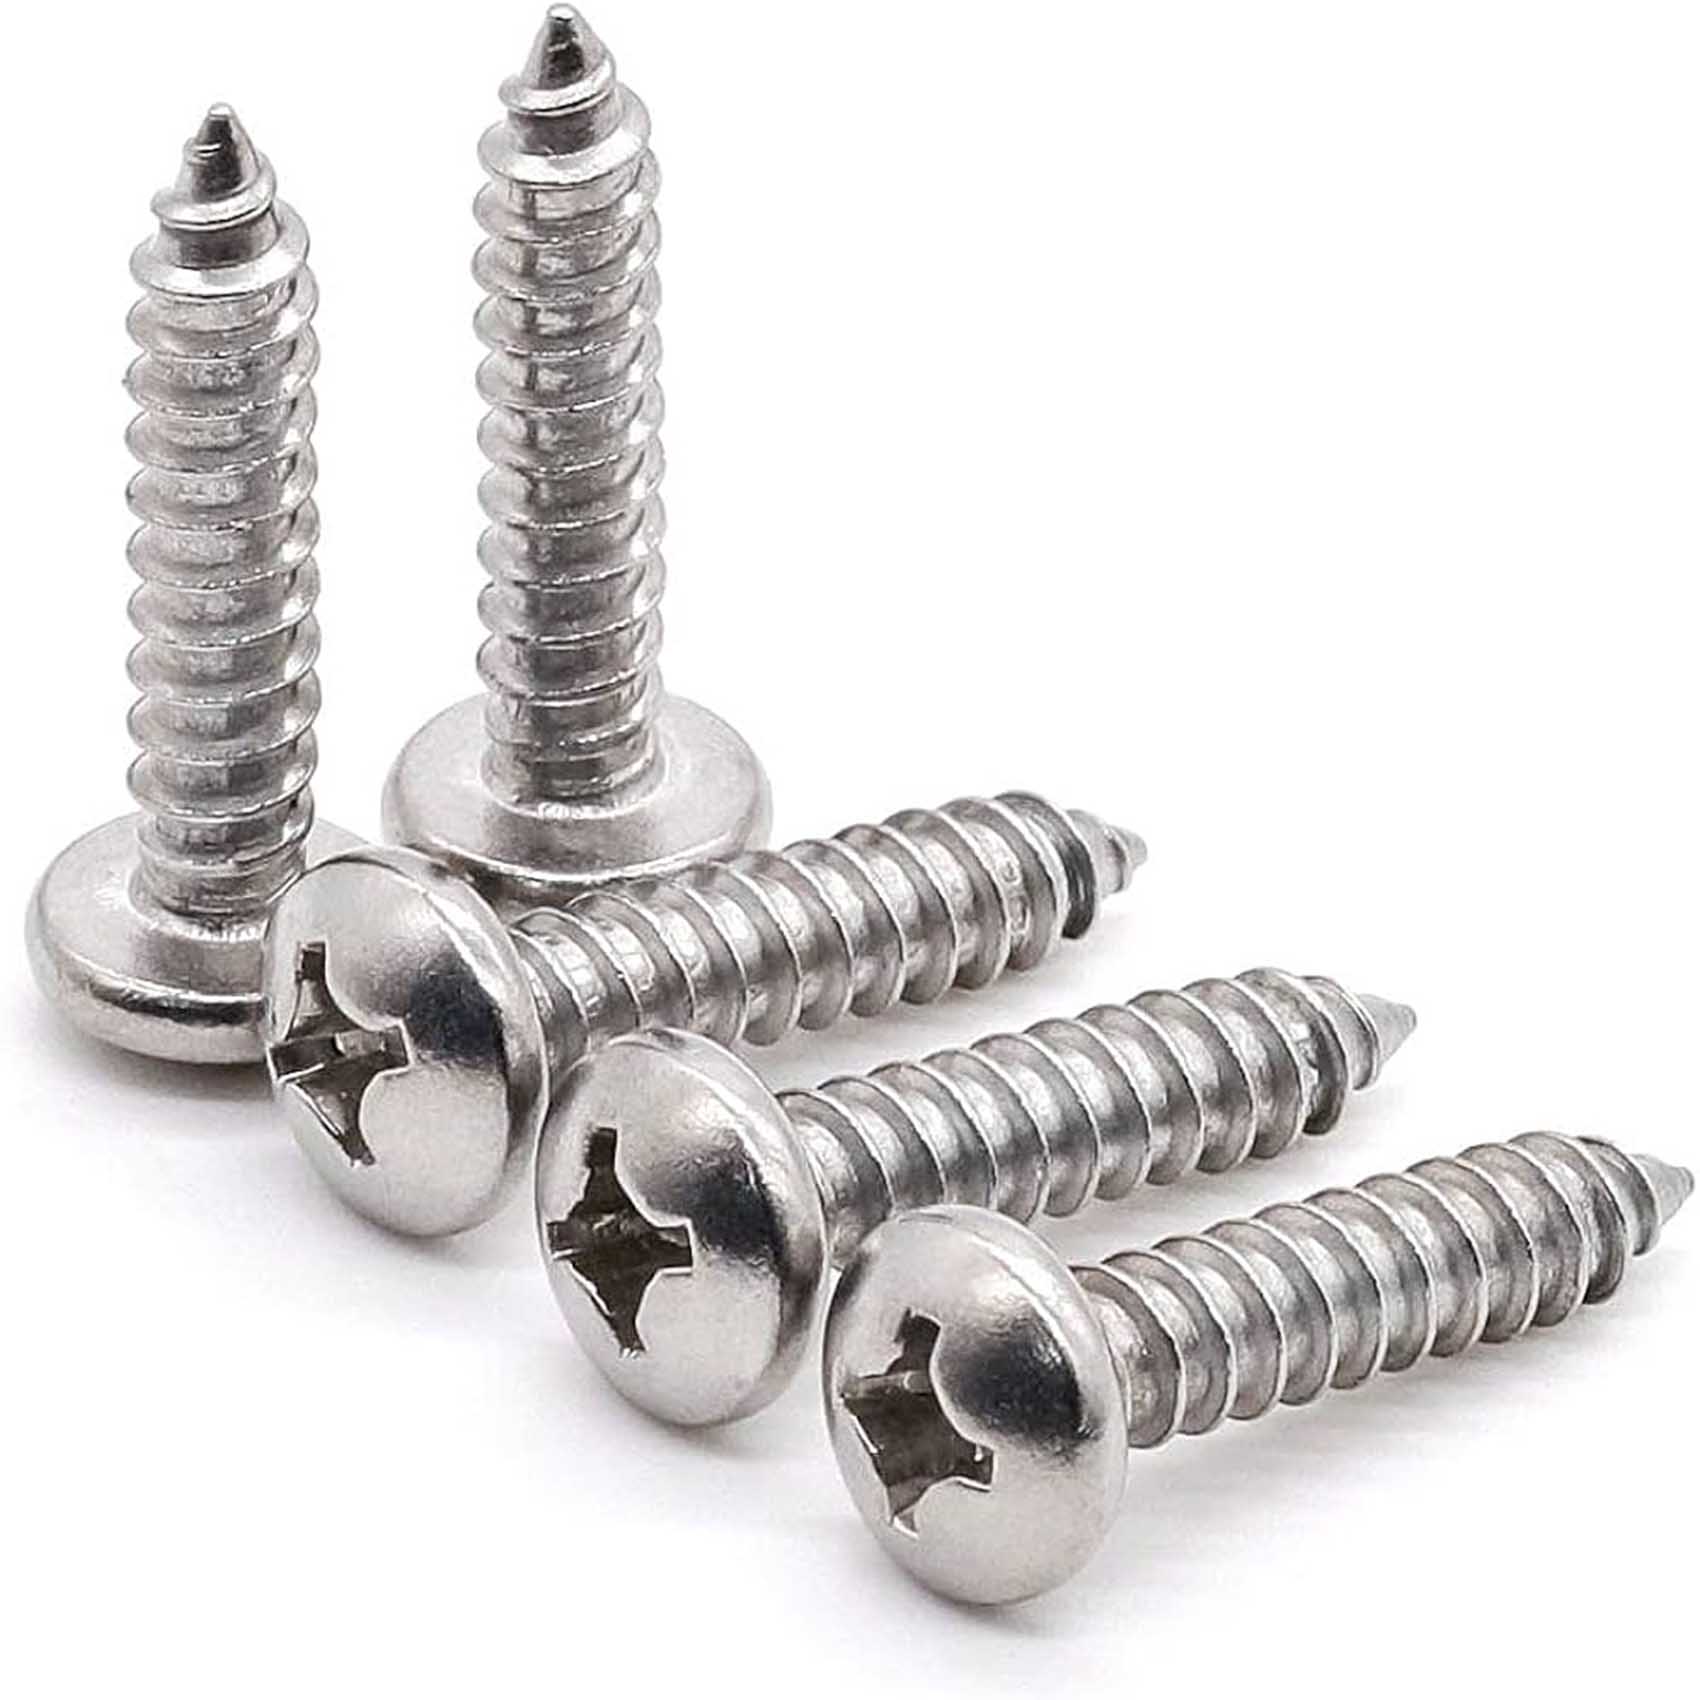 Pan Phillips Self Tapping Screws  Suppliers in Mumbai India